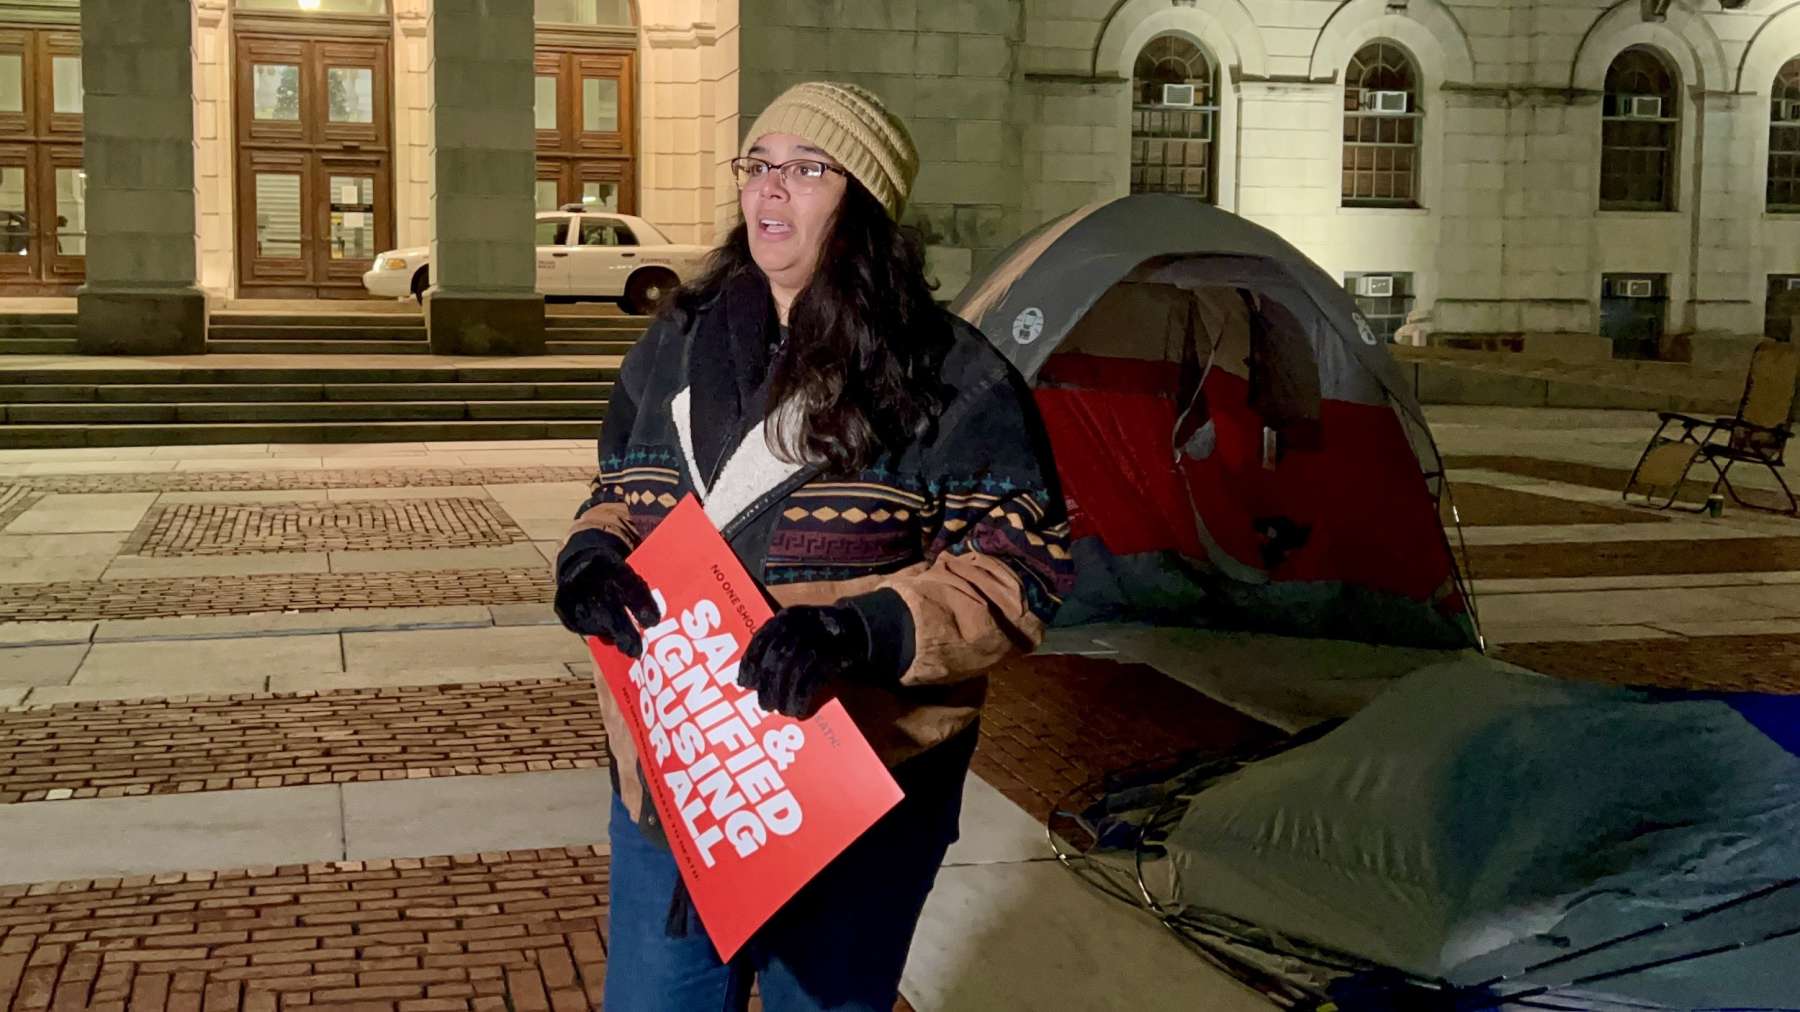 Rhode Island News: Senator Mendes to sleep in a tent outside State House until leadership acts on homelessness crisis